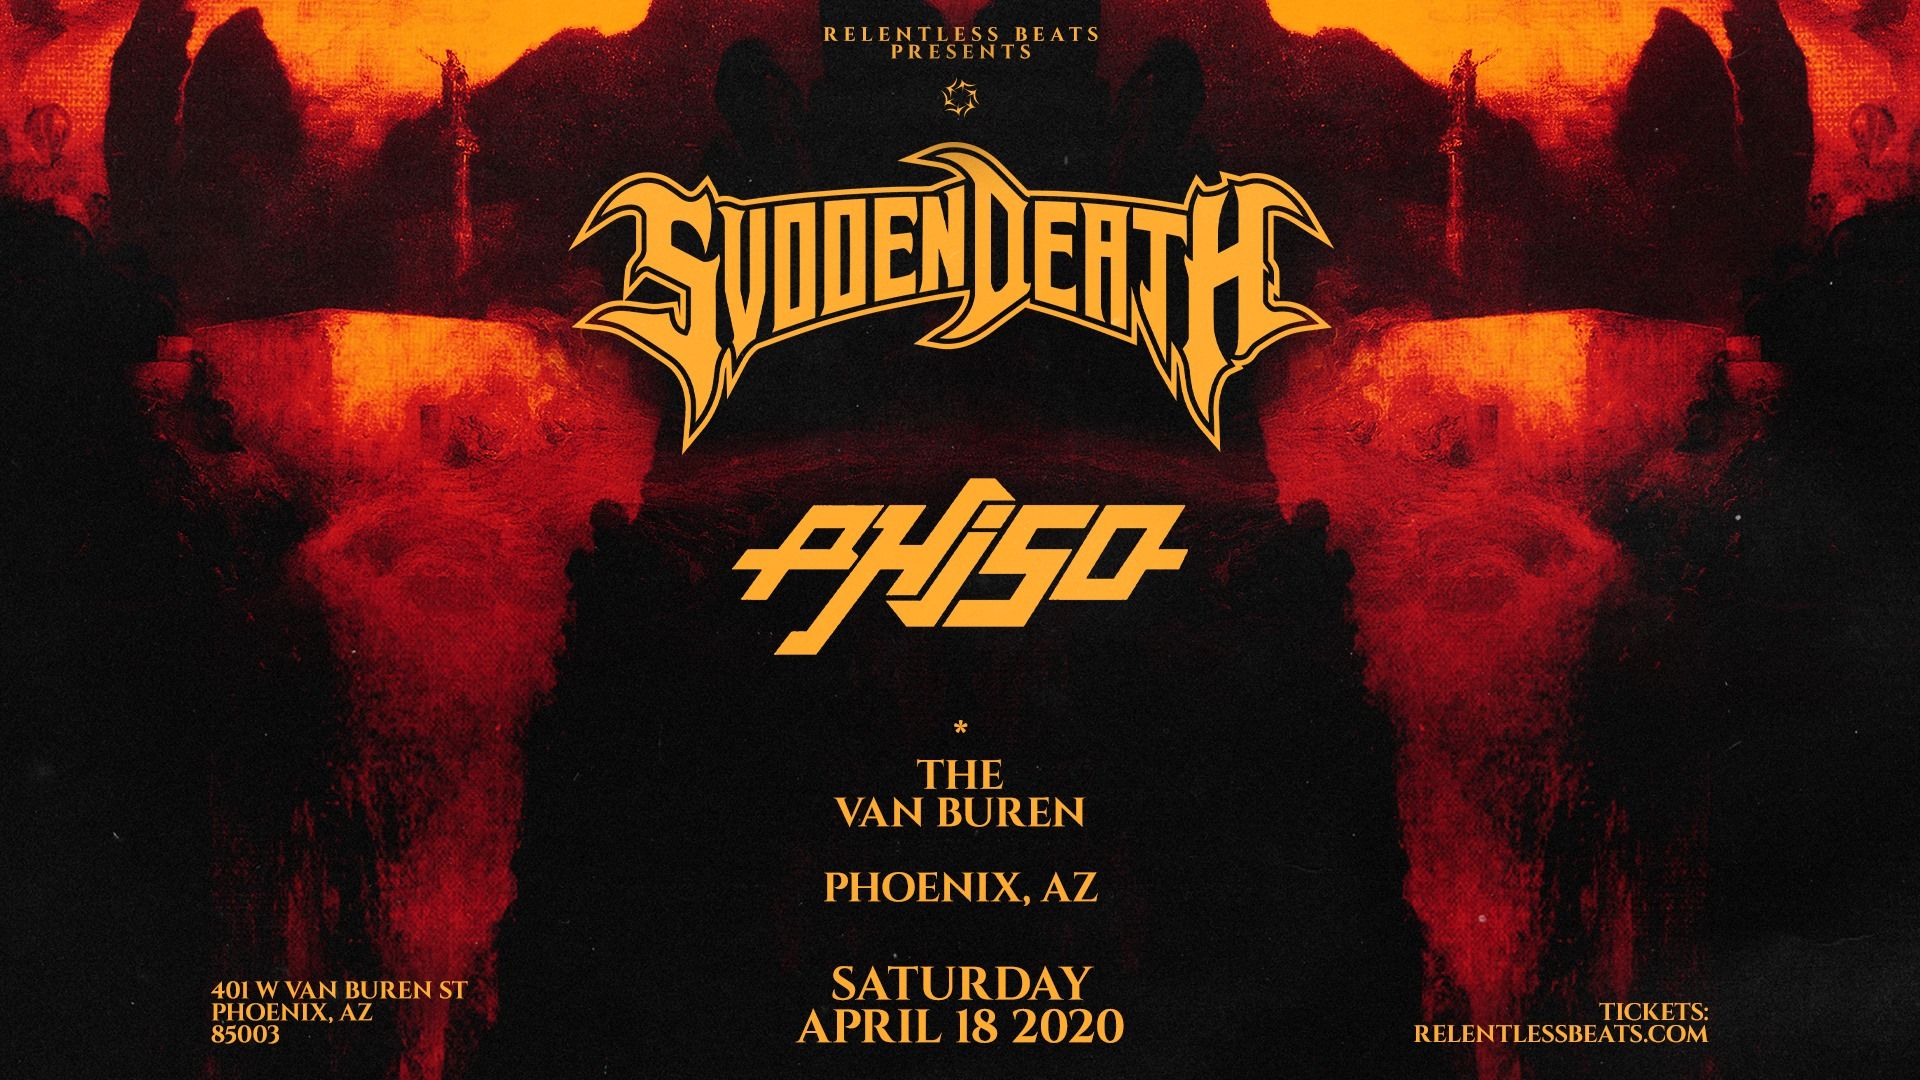 Svdden Death + Phiso [EVENT GUIDE]. Find Ticket & Lineup Info